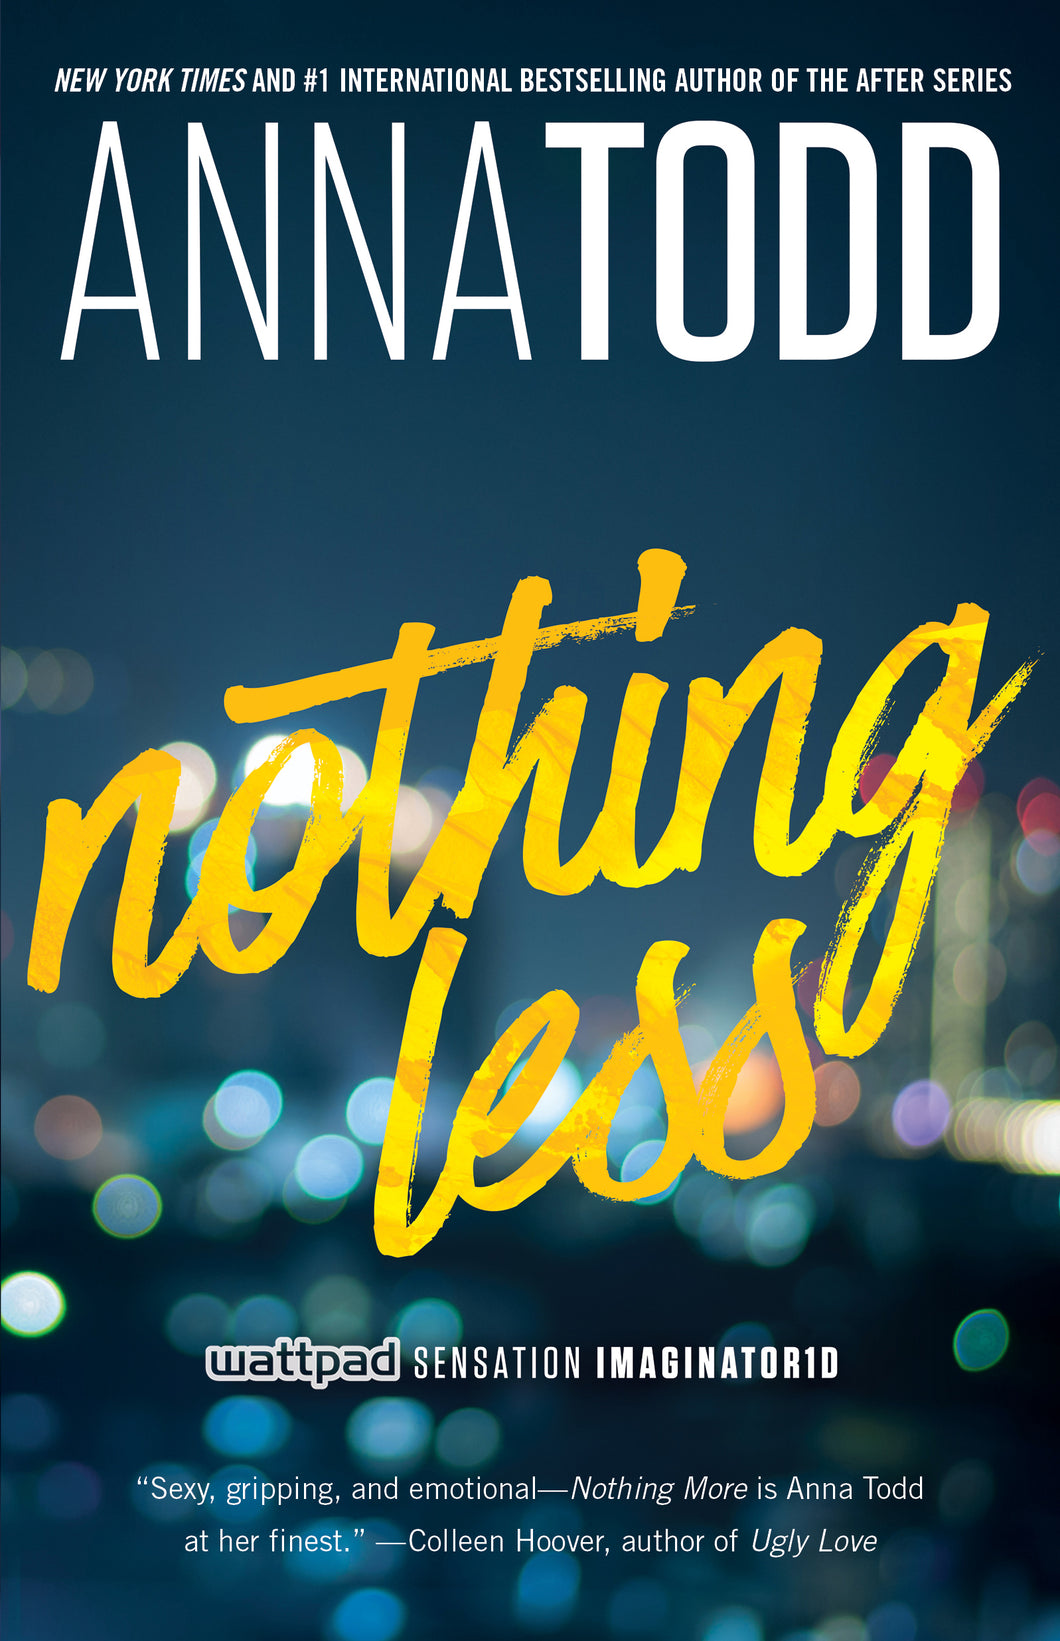 Autographed 'Nothing Less' (Landon Gibson #2, USA Edition)